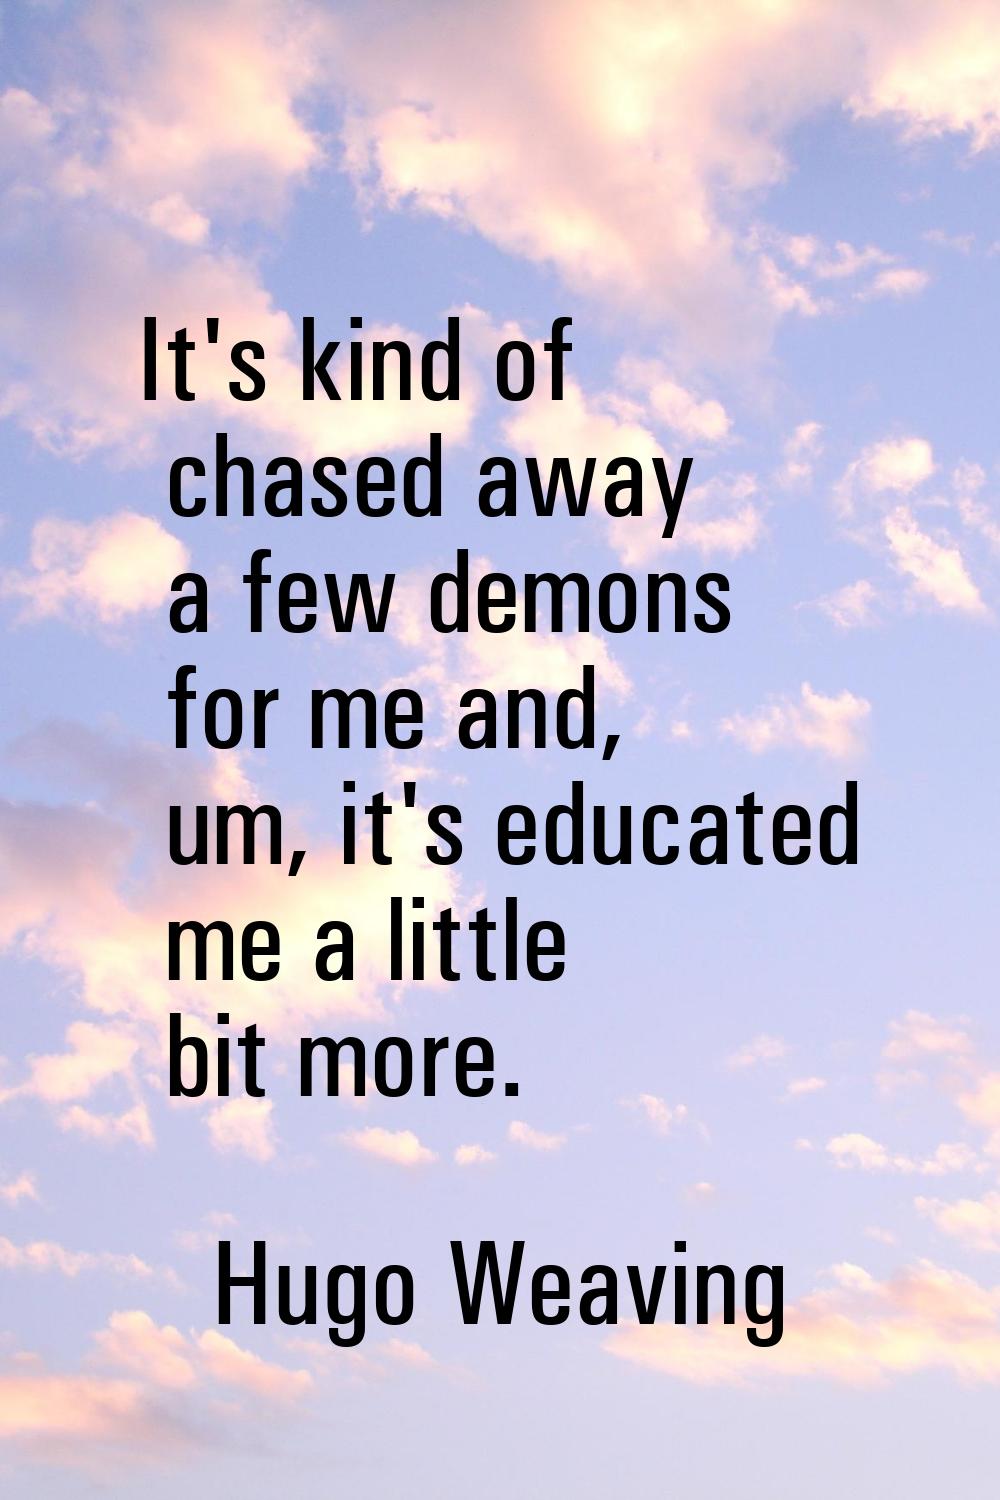 It's kind of chased away a few demons for me and, um, it's educated me a little bit more.